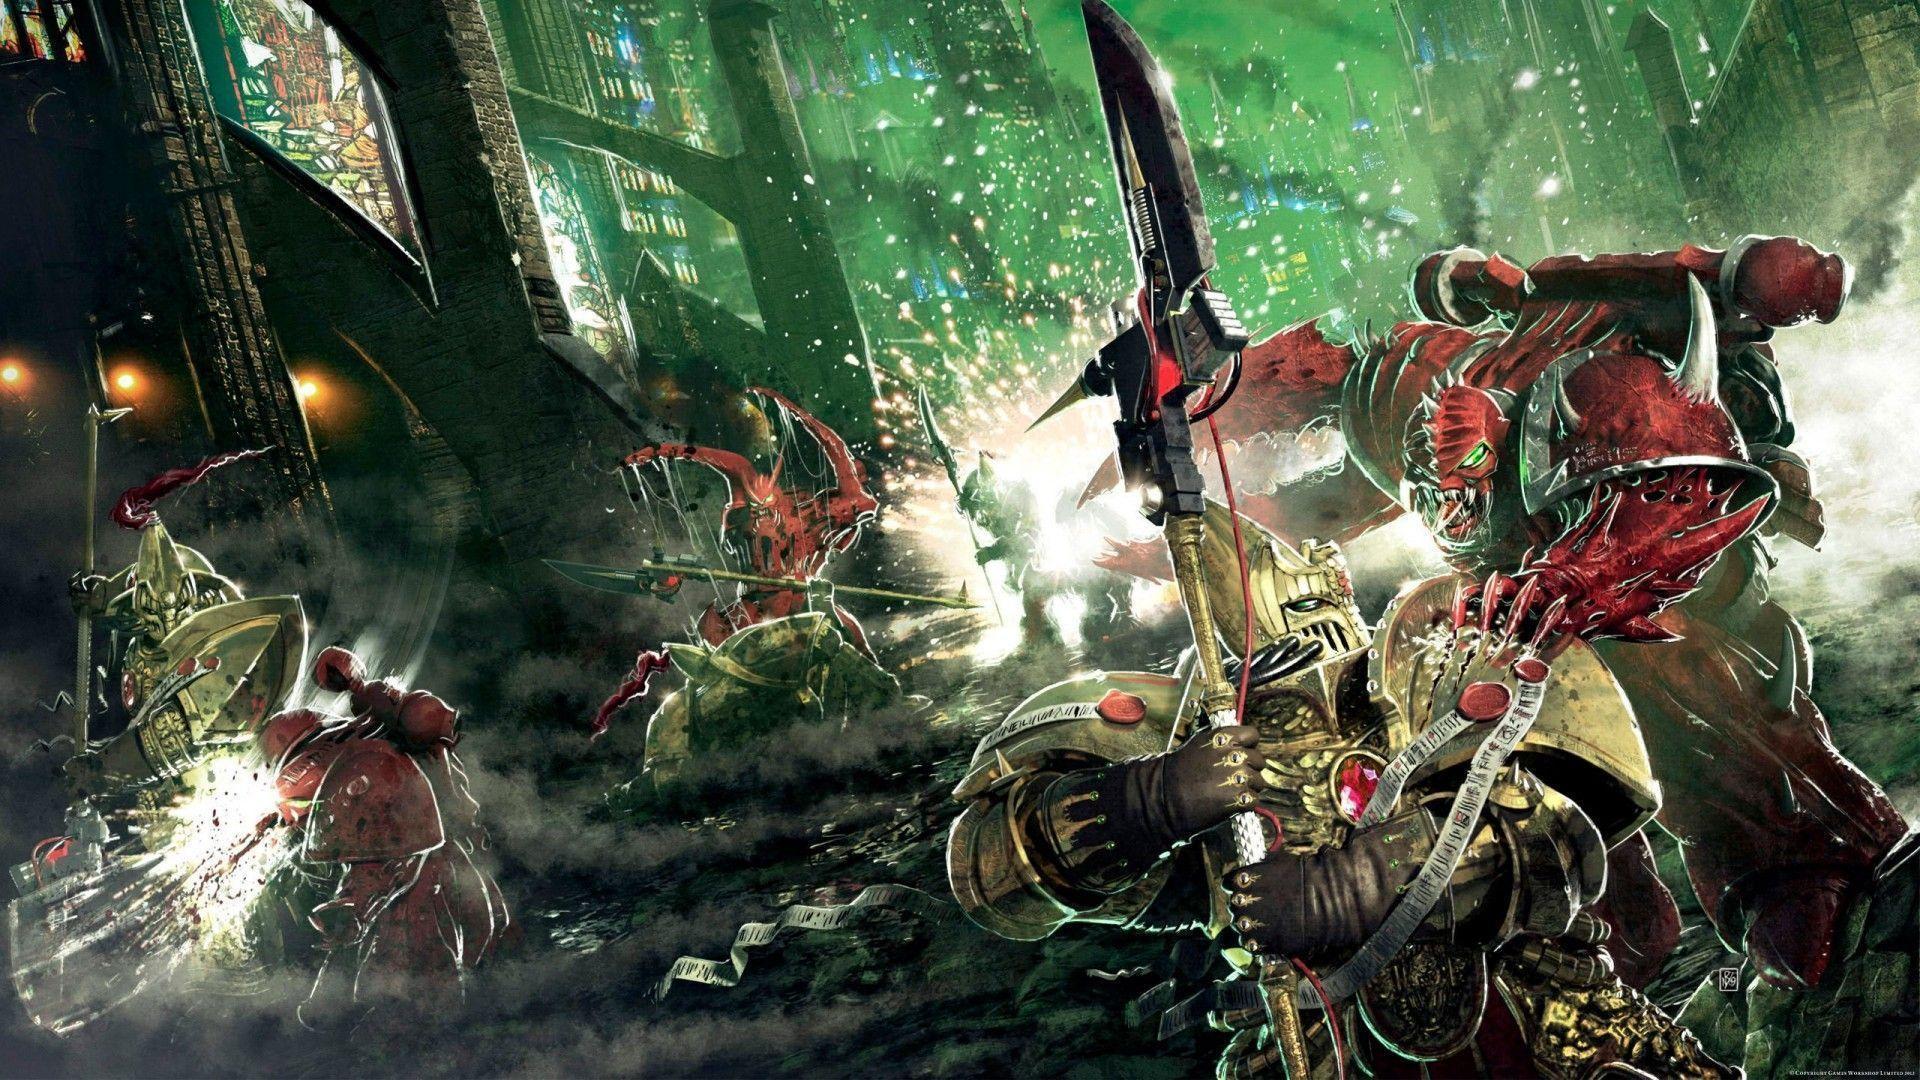 image For > Chaos Space Marine Wallpaper